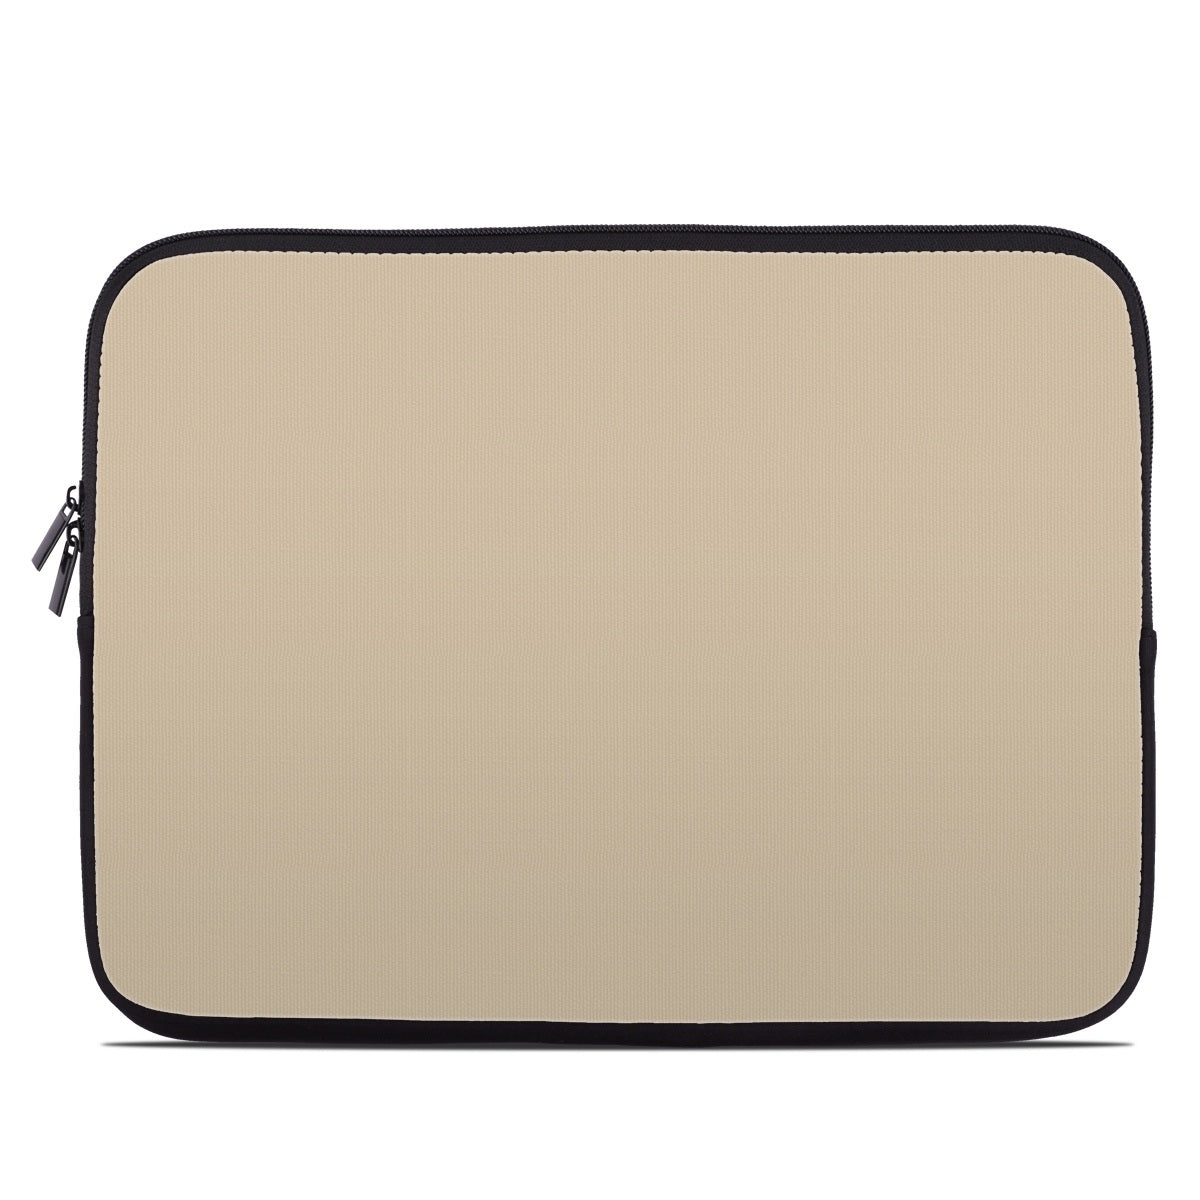 Solid State Beige - Laptop Sleeve